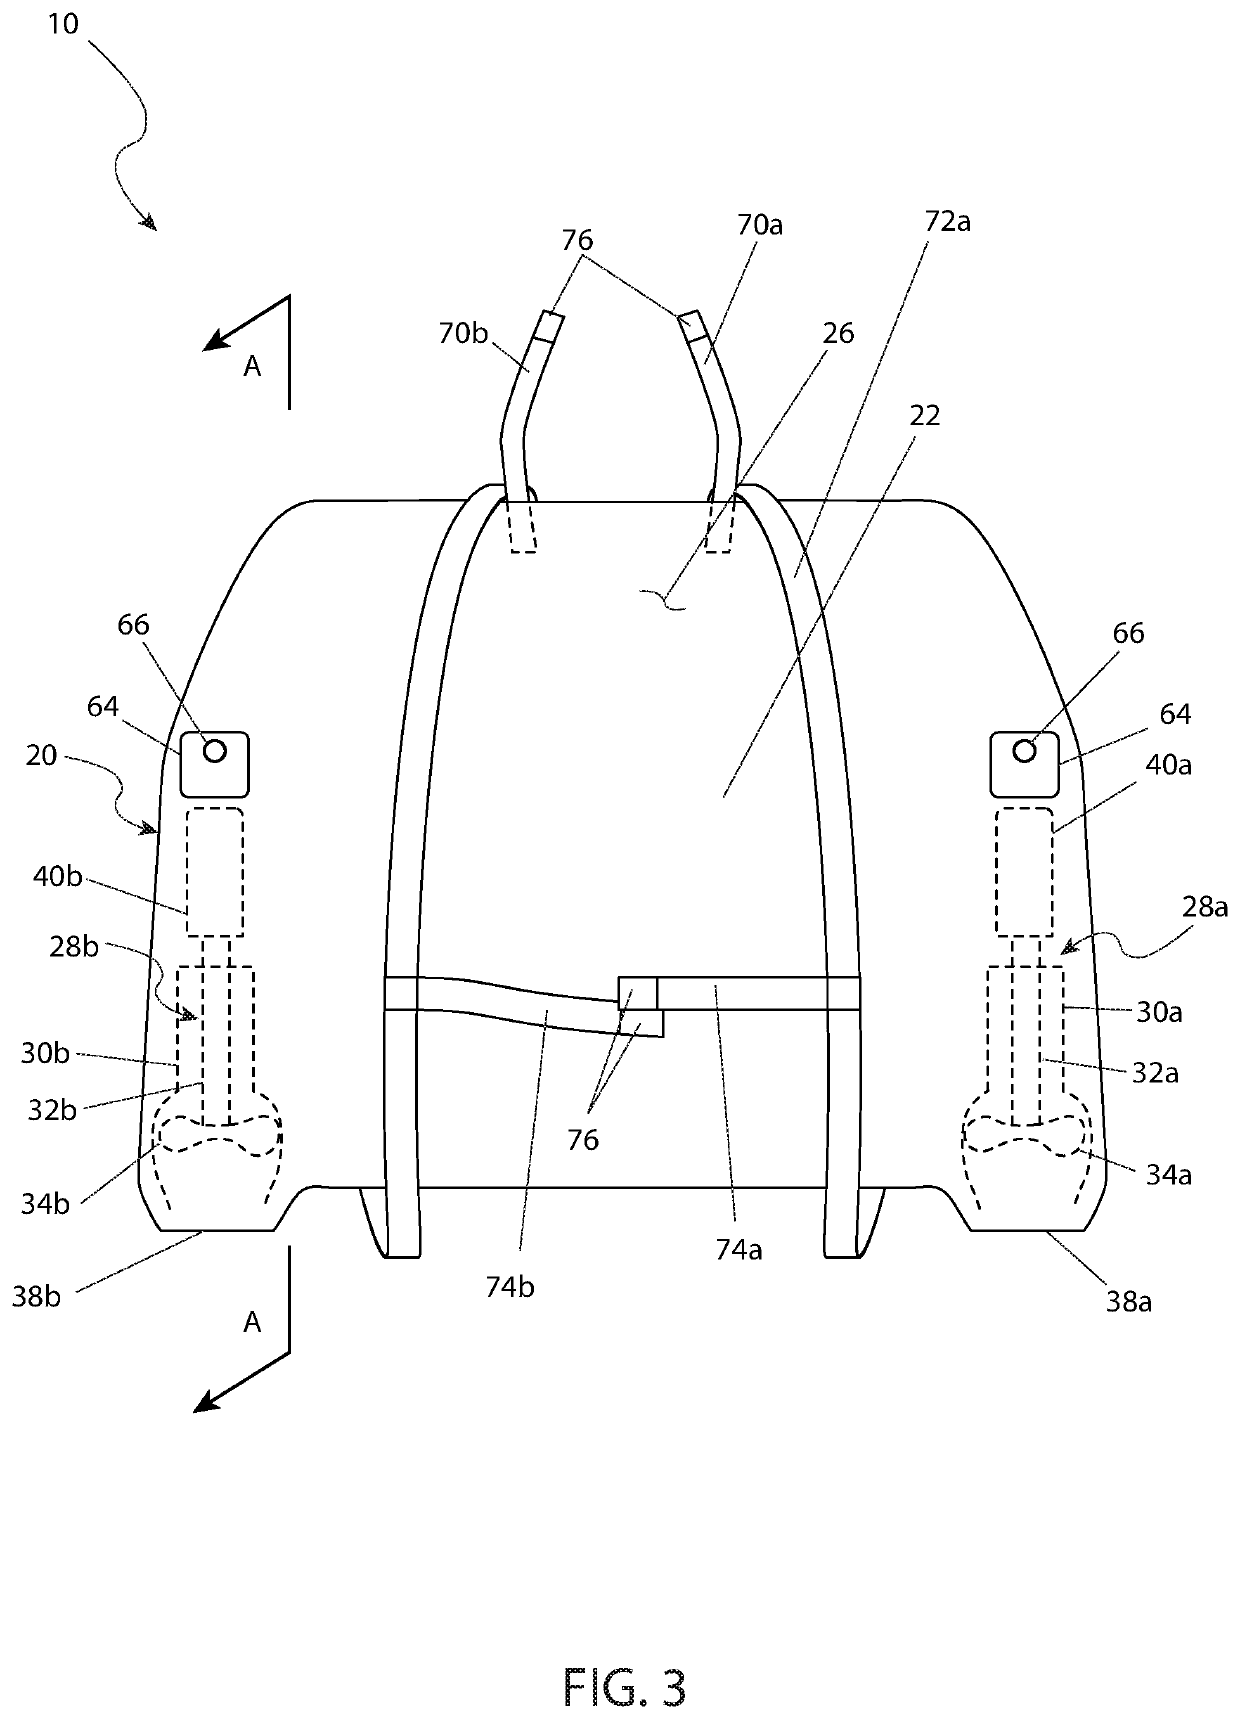 Self-propelled personal flotation device